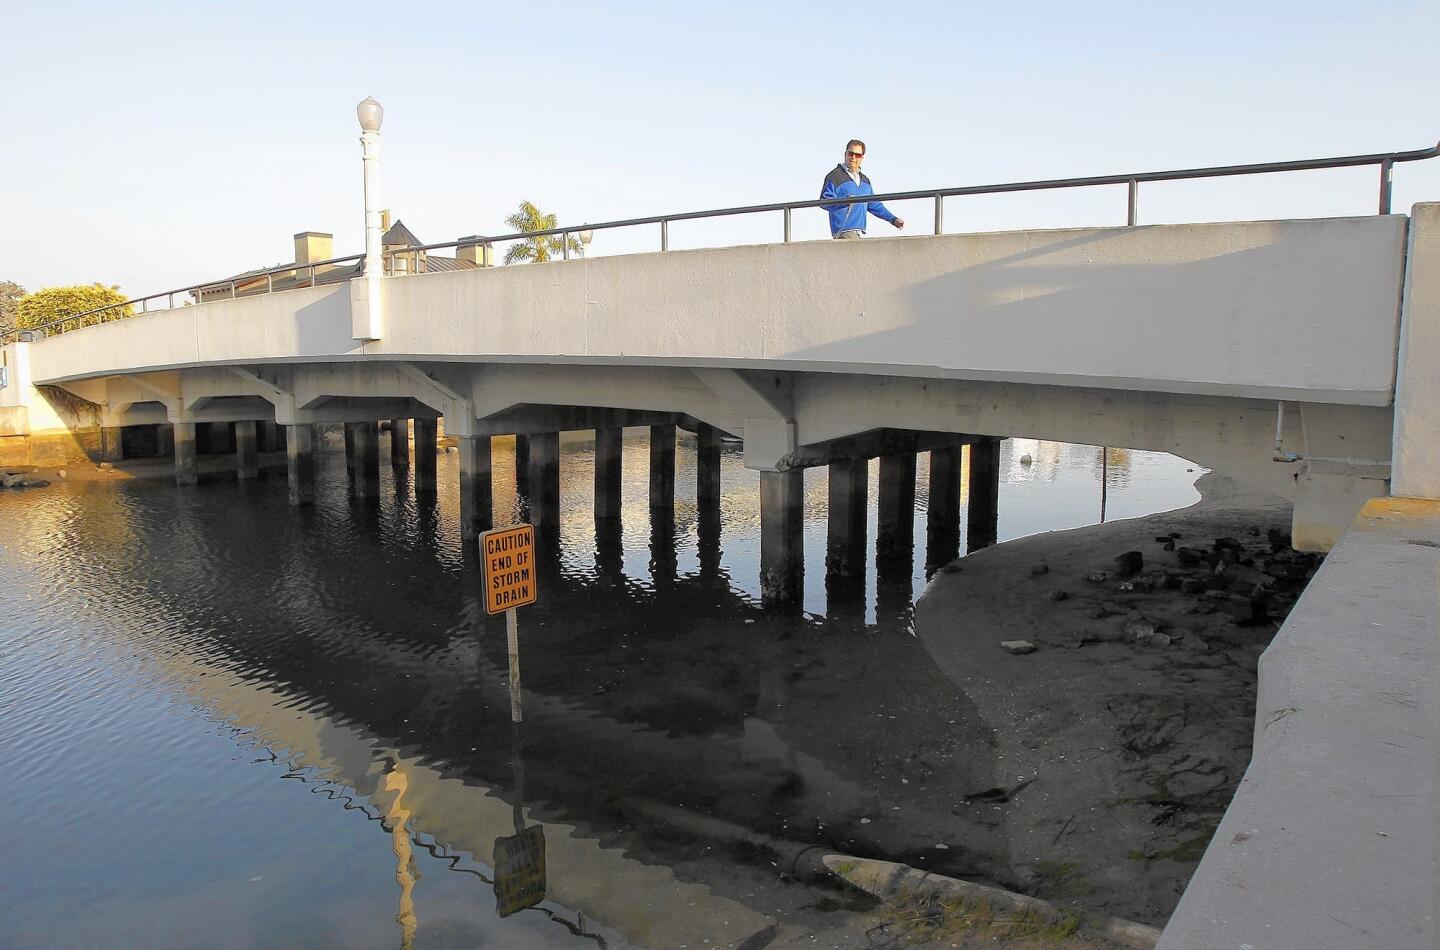 The Park Avenue bridge over the Grand Canal that connects Balboa Island to Little Balboa Island will be demolished and rebuilt as part of an ongoing project scheduled for completion in early 2017.